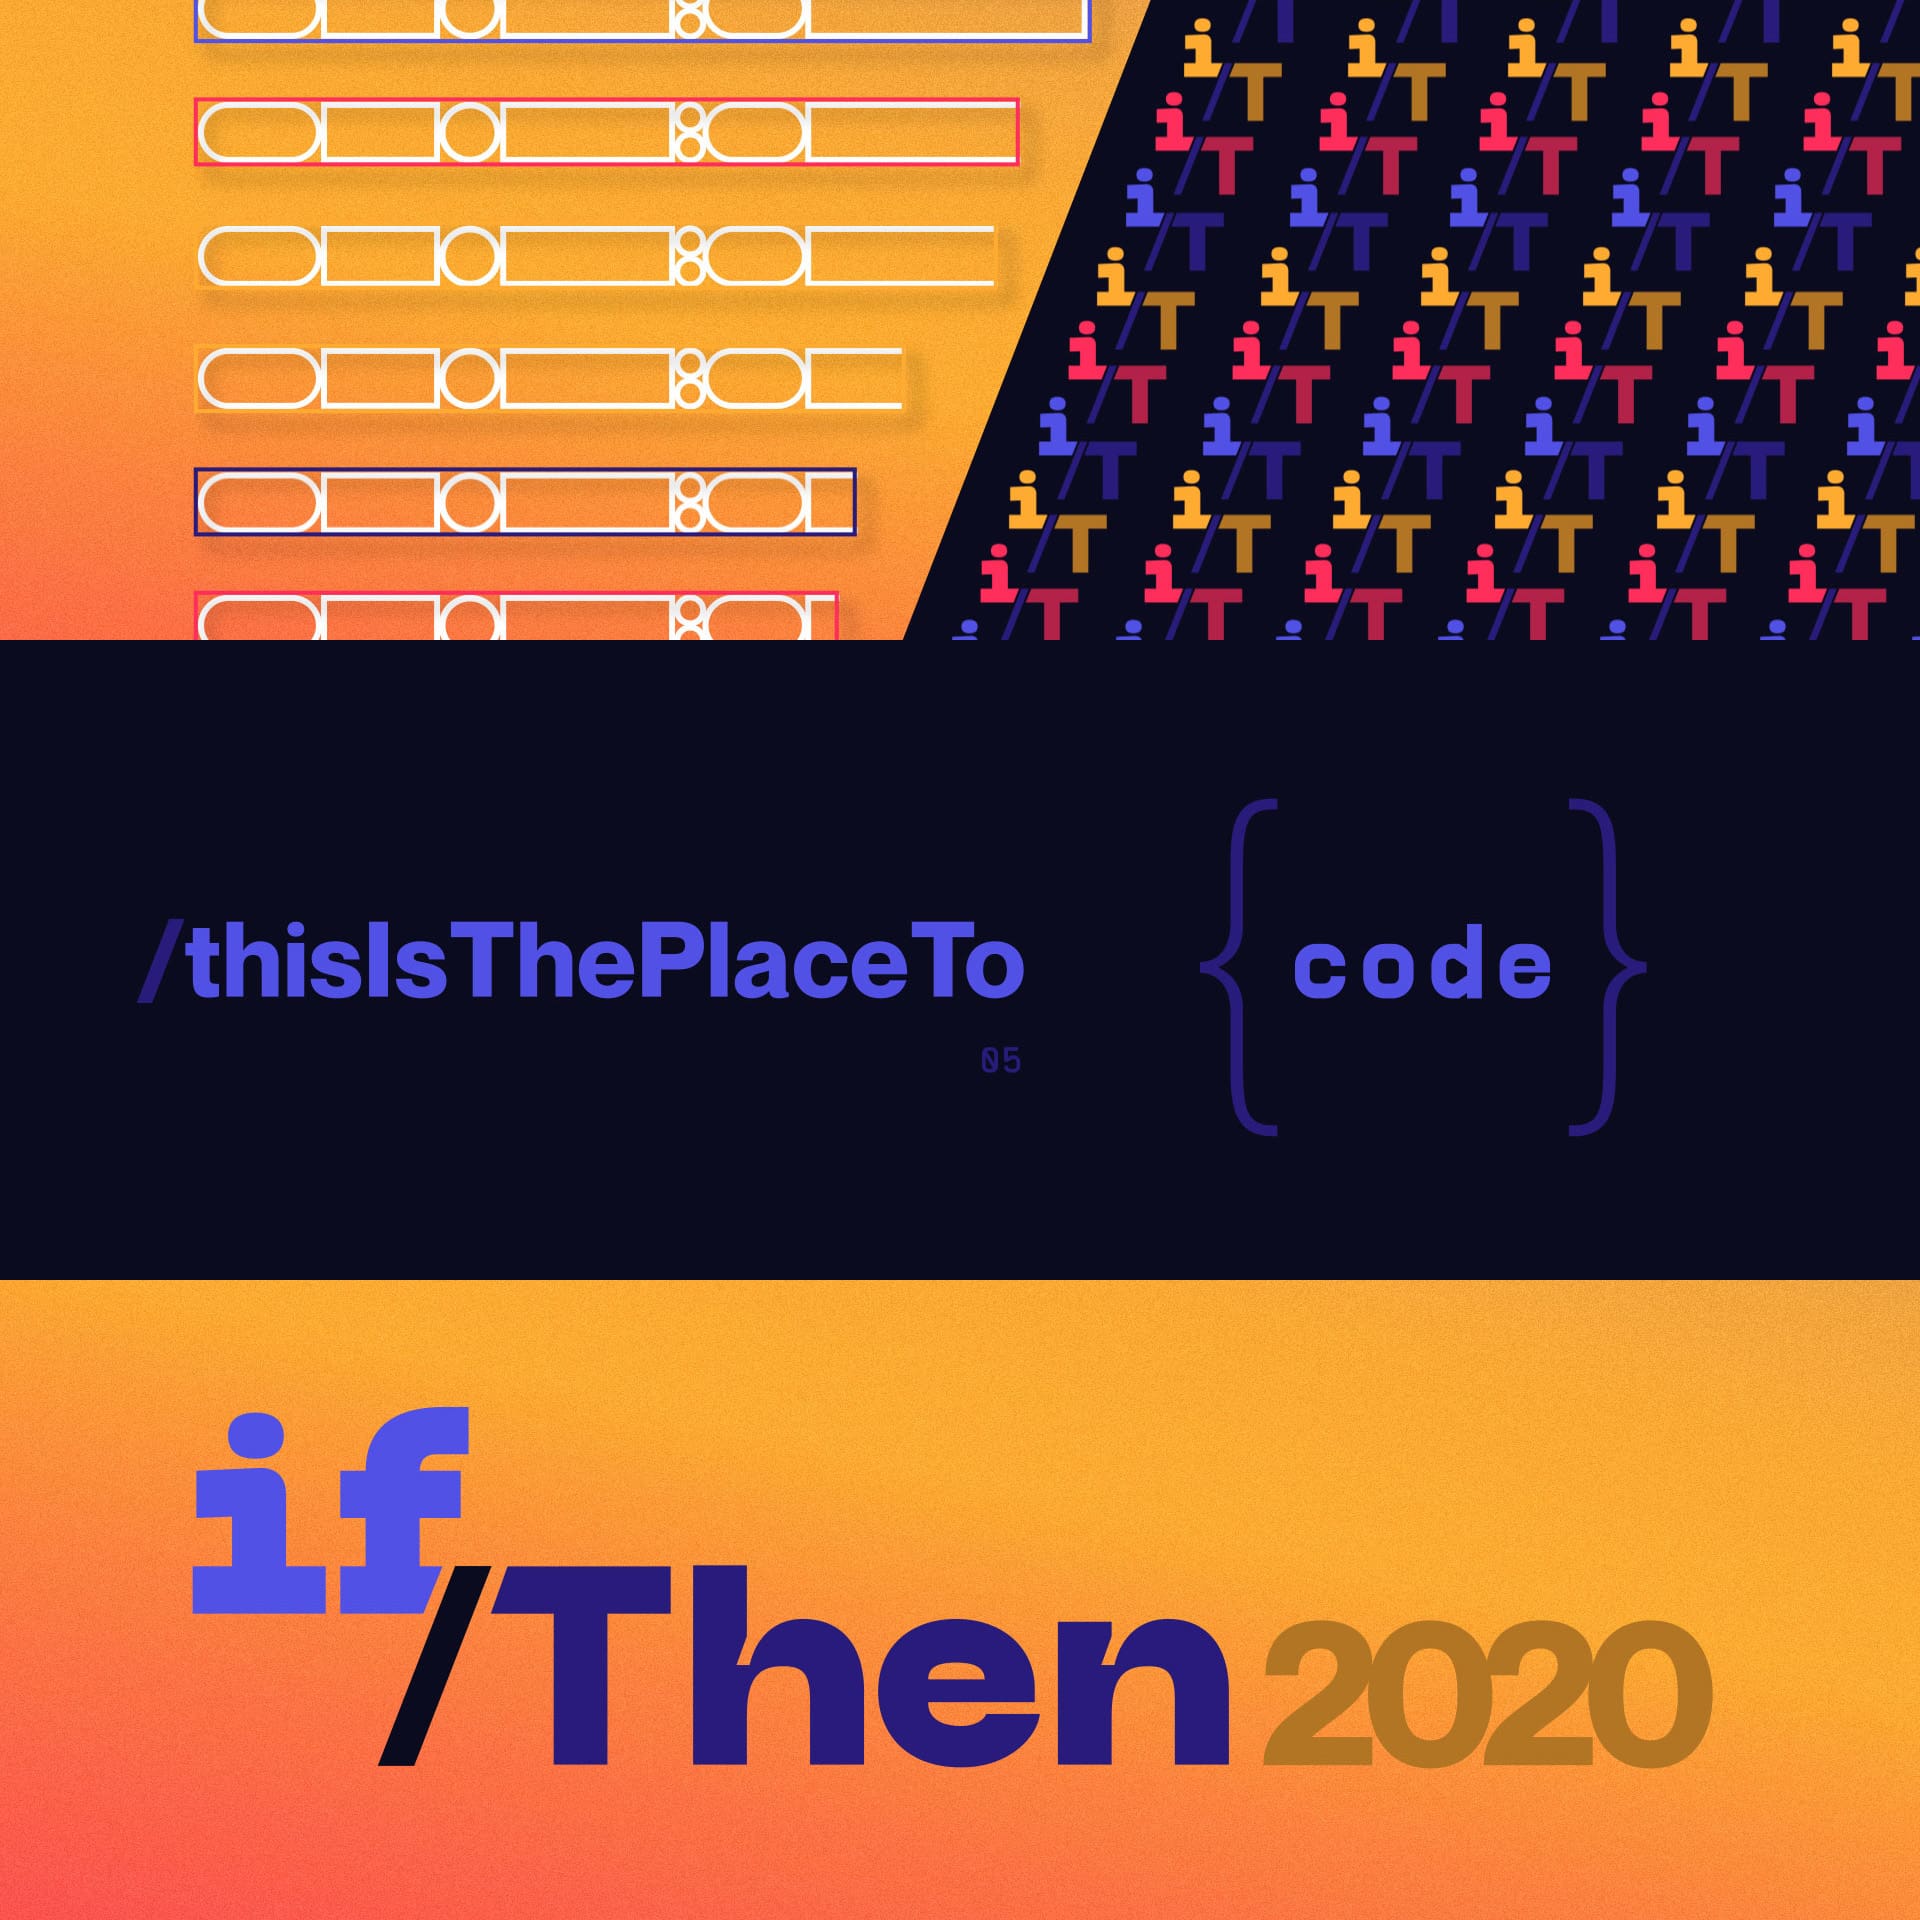 Main title sequence for a fictitious, virtual event for creative coders. At the bottom is a yellow and orange gradient text box with the blue and gold text, "if/Then 2020". In the center is the black textbox with the blue text, "This is the place to code". At the top are decorative geometric shapes in white, red, yellow and blue.